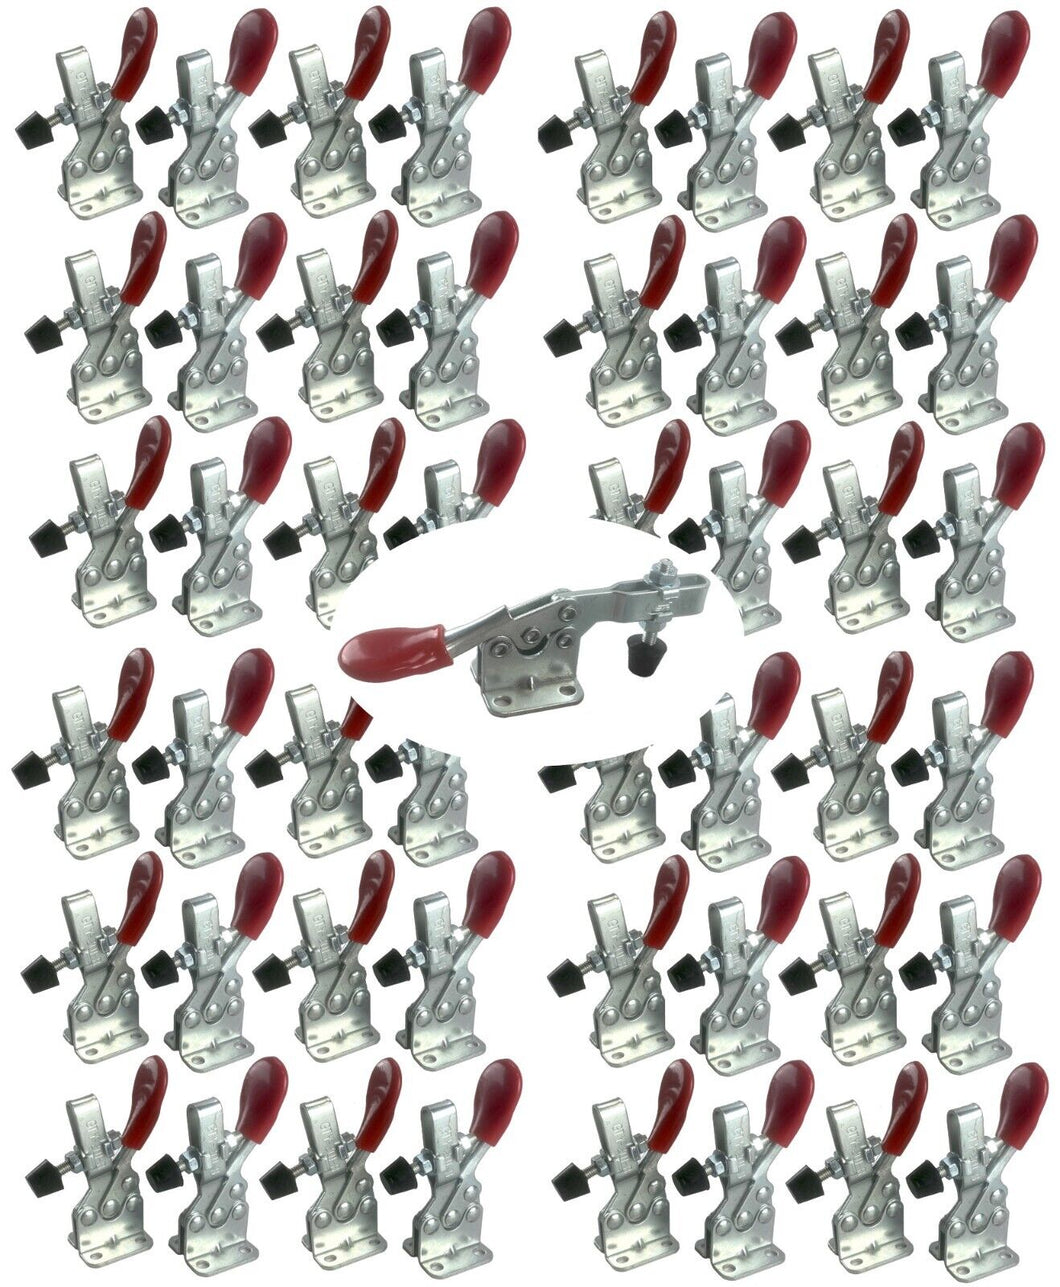 Lot of 150 Quick Release TOGGLE CLAMPS Stainless Steel 220lb Capacity GTY-201-B